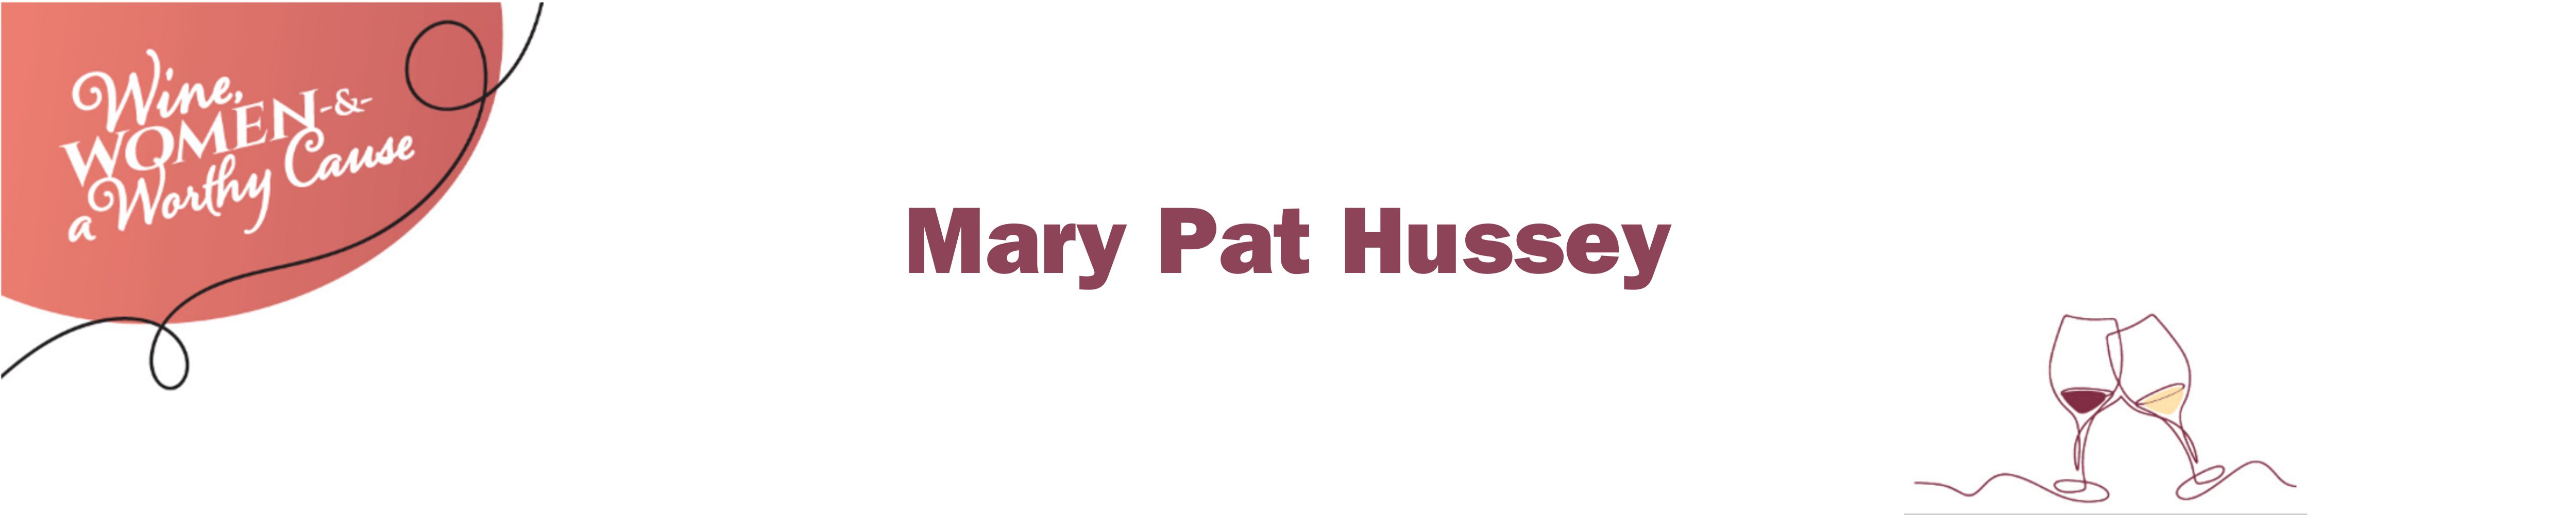 Mary Pat Hussey